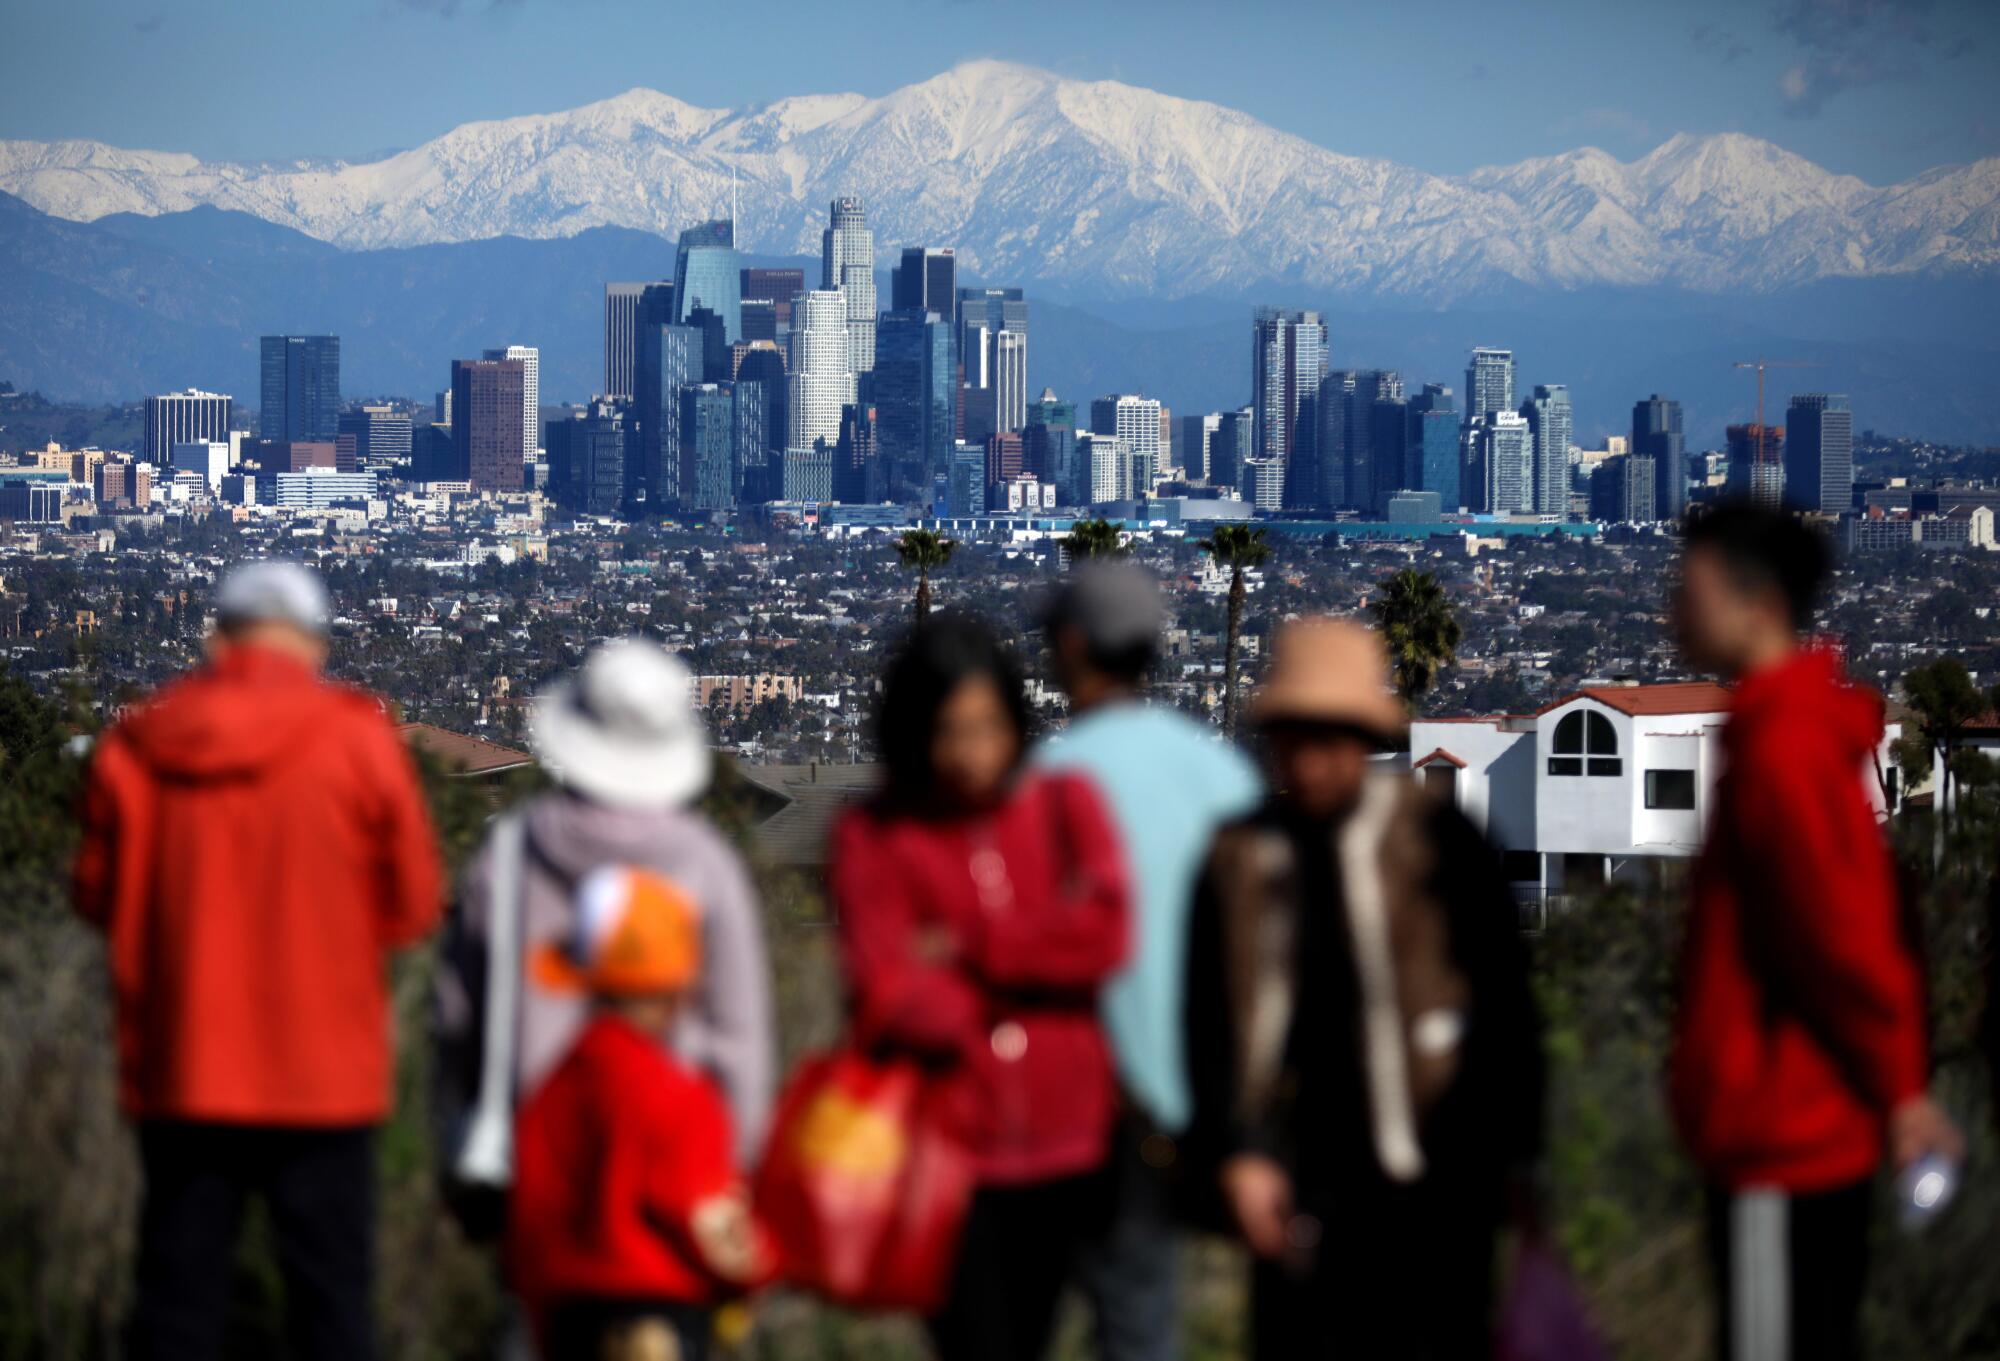 Many people came to see the Los Angeles skyline with the snow-capped San Gabriel Mountains in the background.